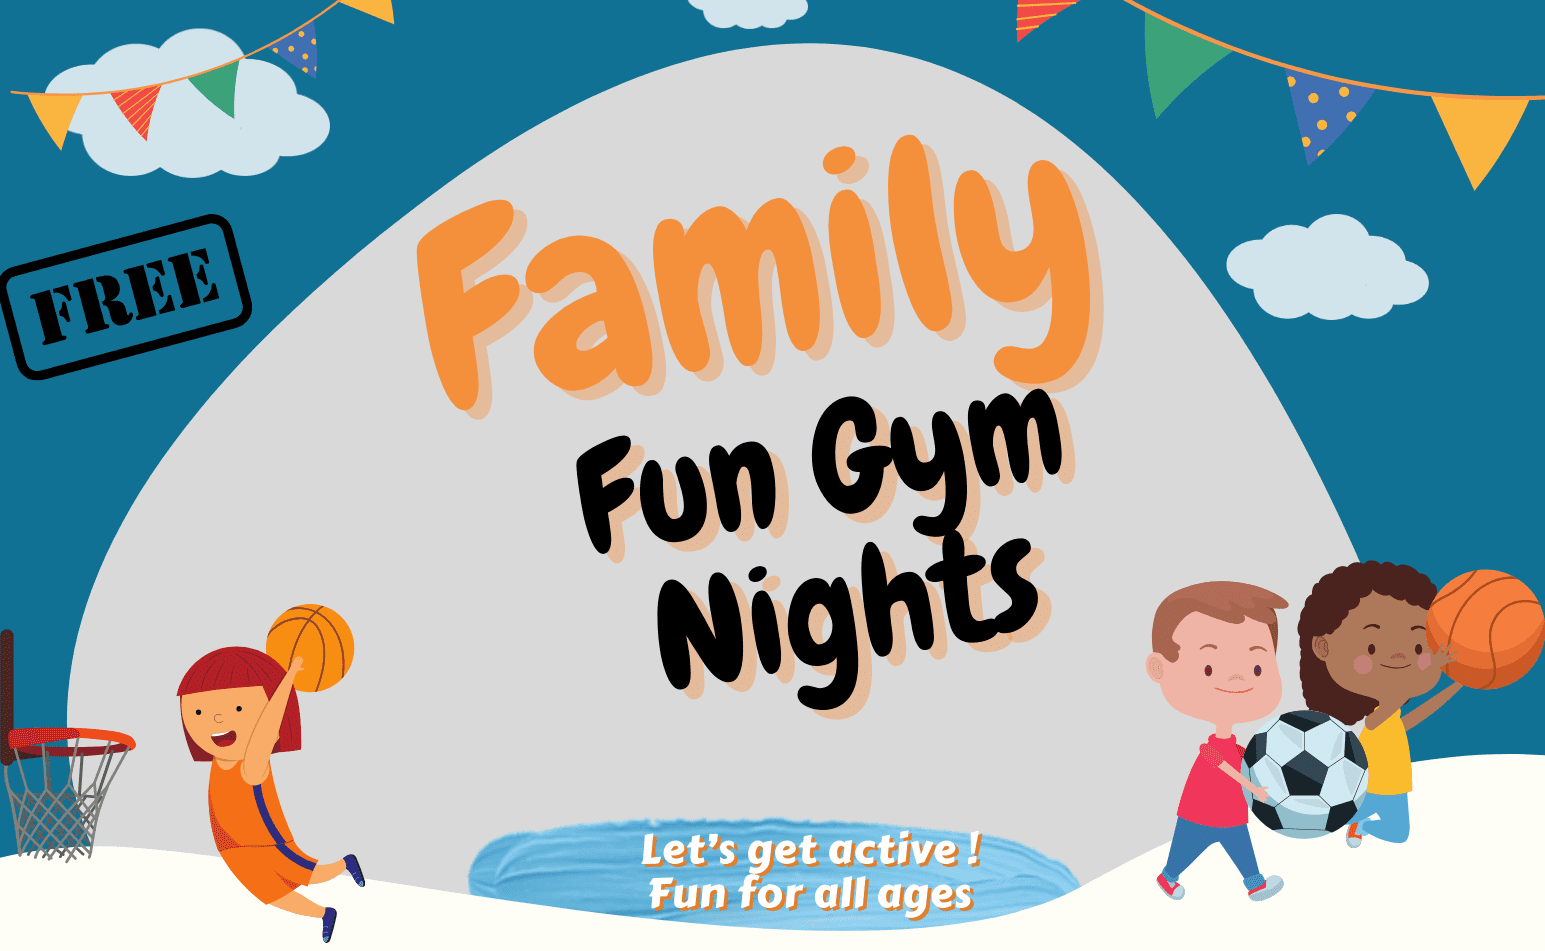 "Family Fun Gym nights. Let's get active! Fun for all ages" Graphics of children playing basketball and soccer